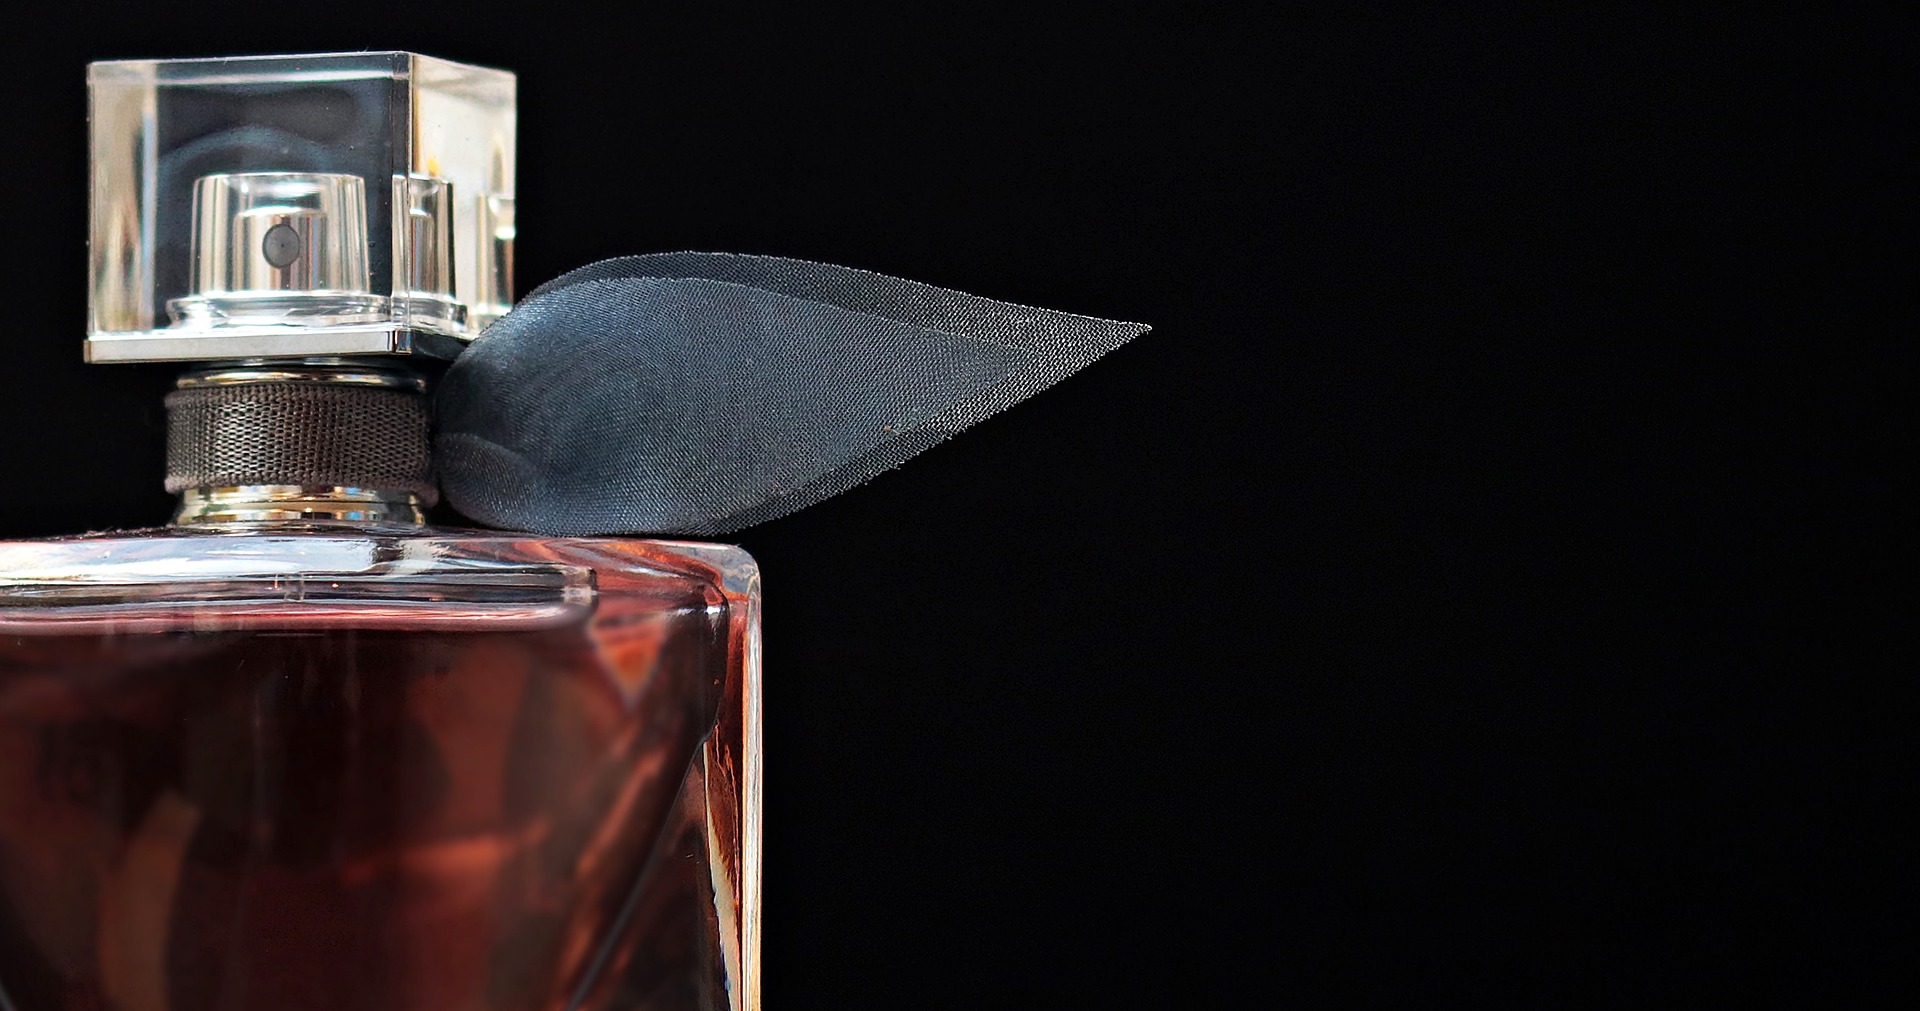 Japan Using AI To Experience Perfume Scents: Bizarre Or Normal?